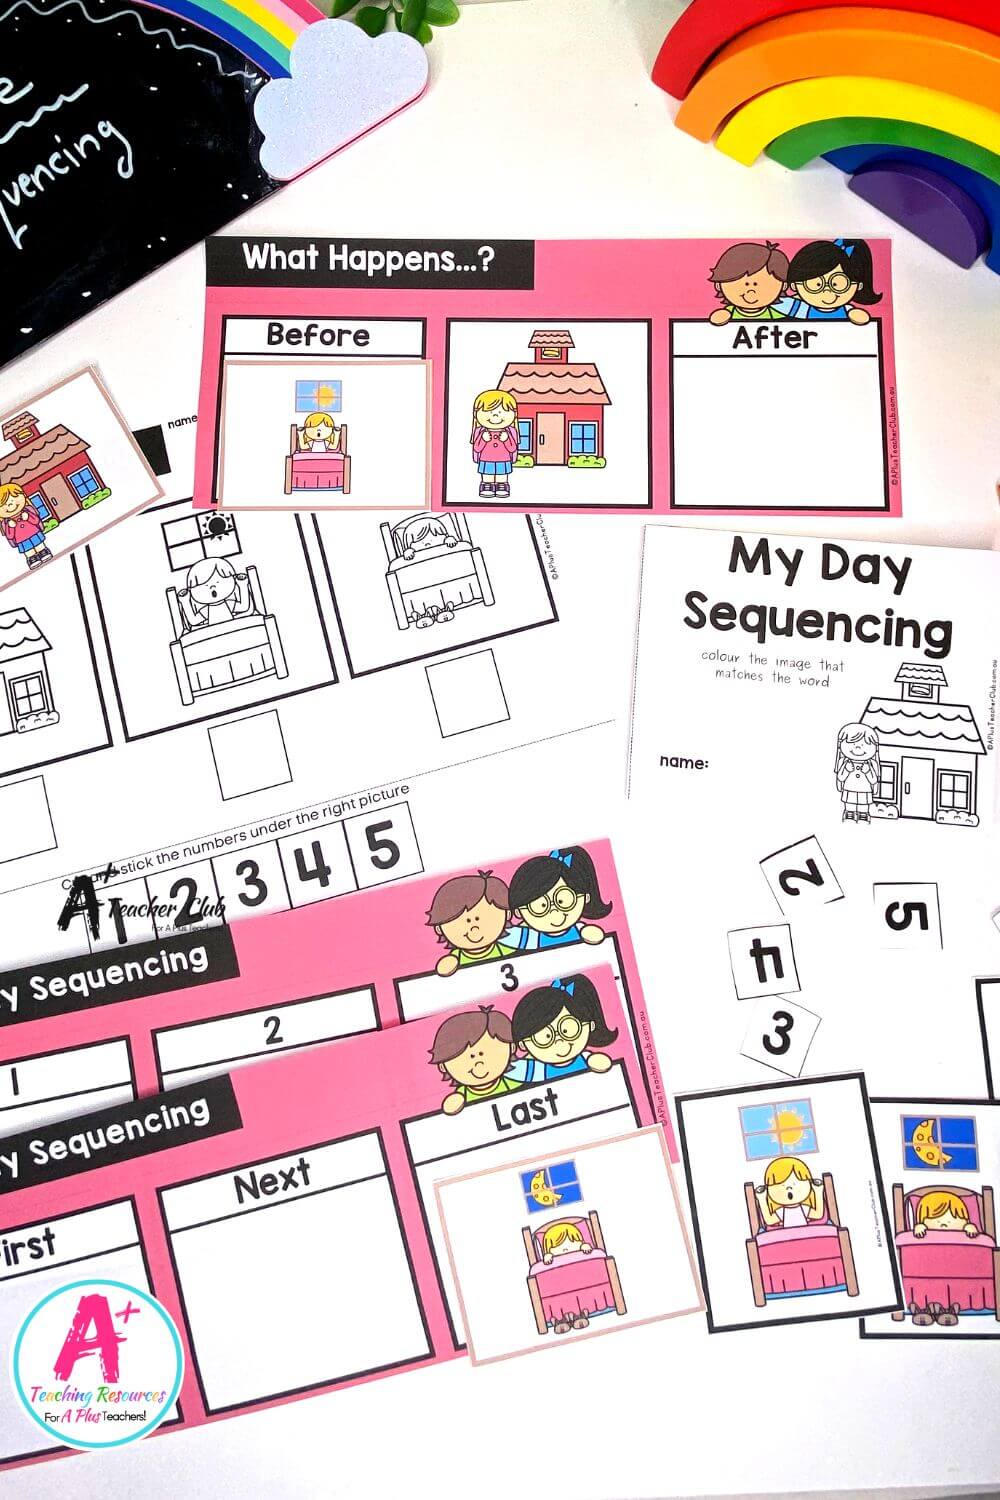 3-Step Sequencing Everyday Events - My Day Activities Pack